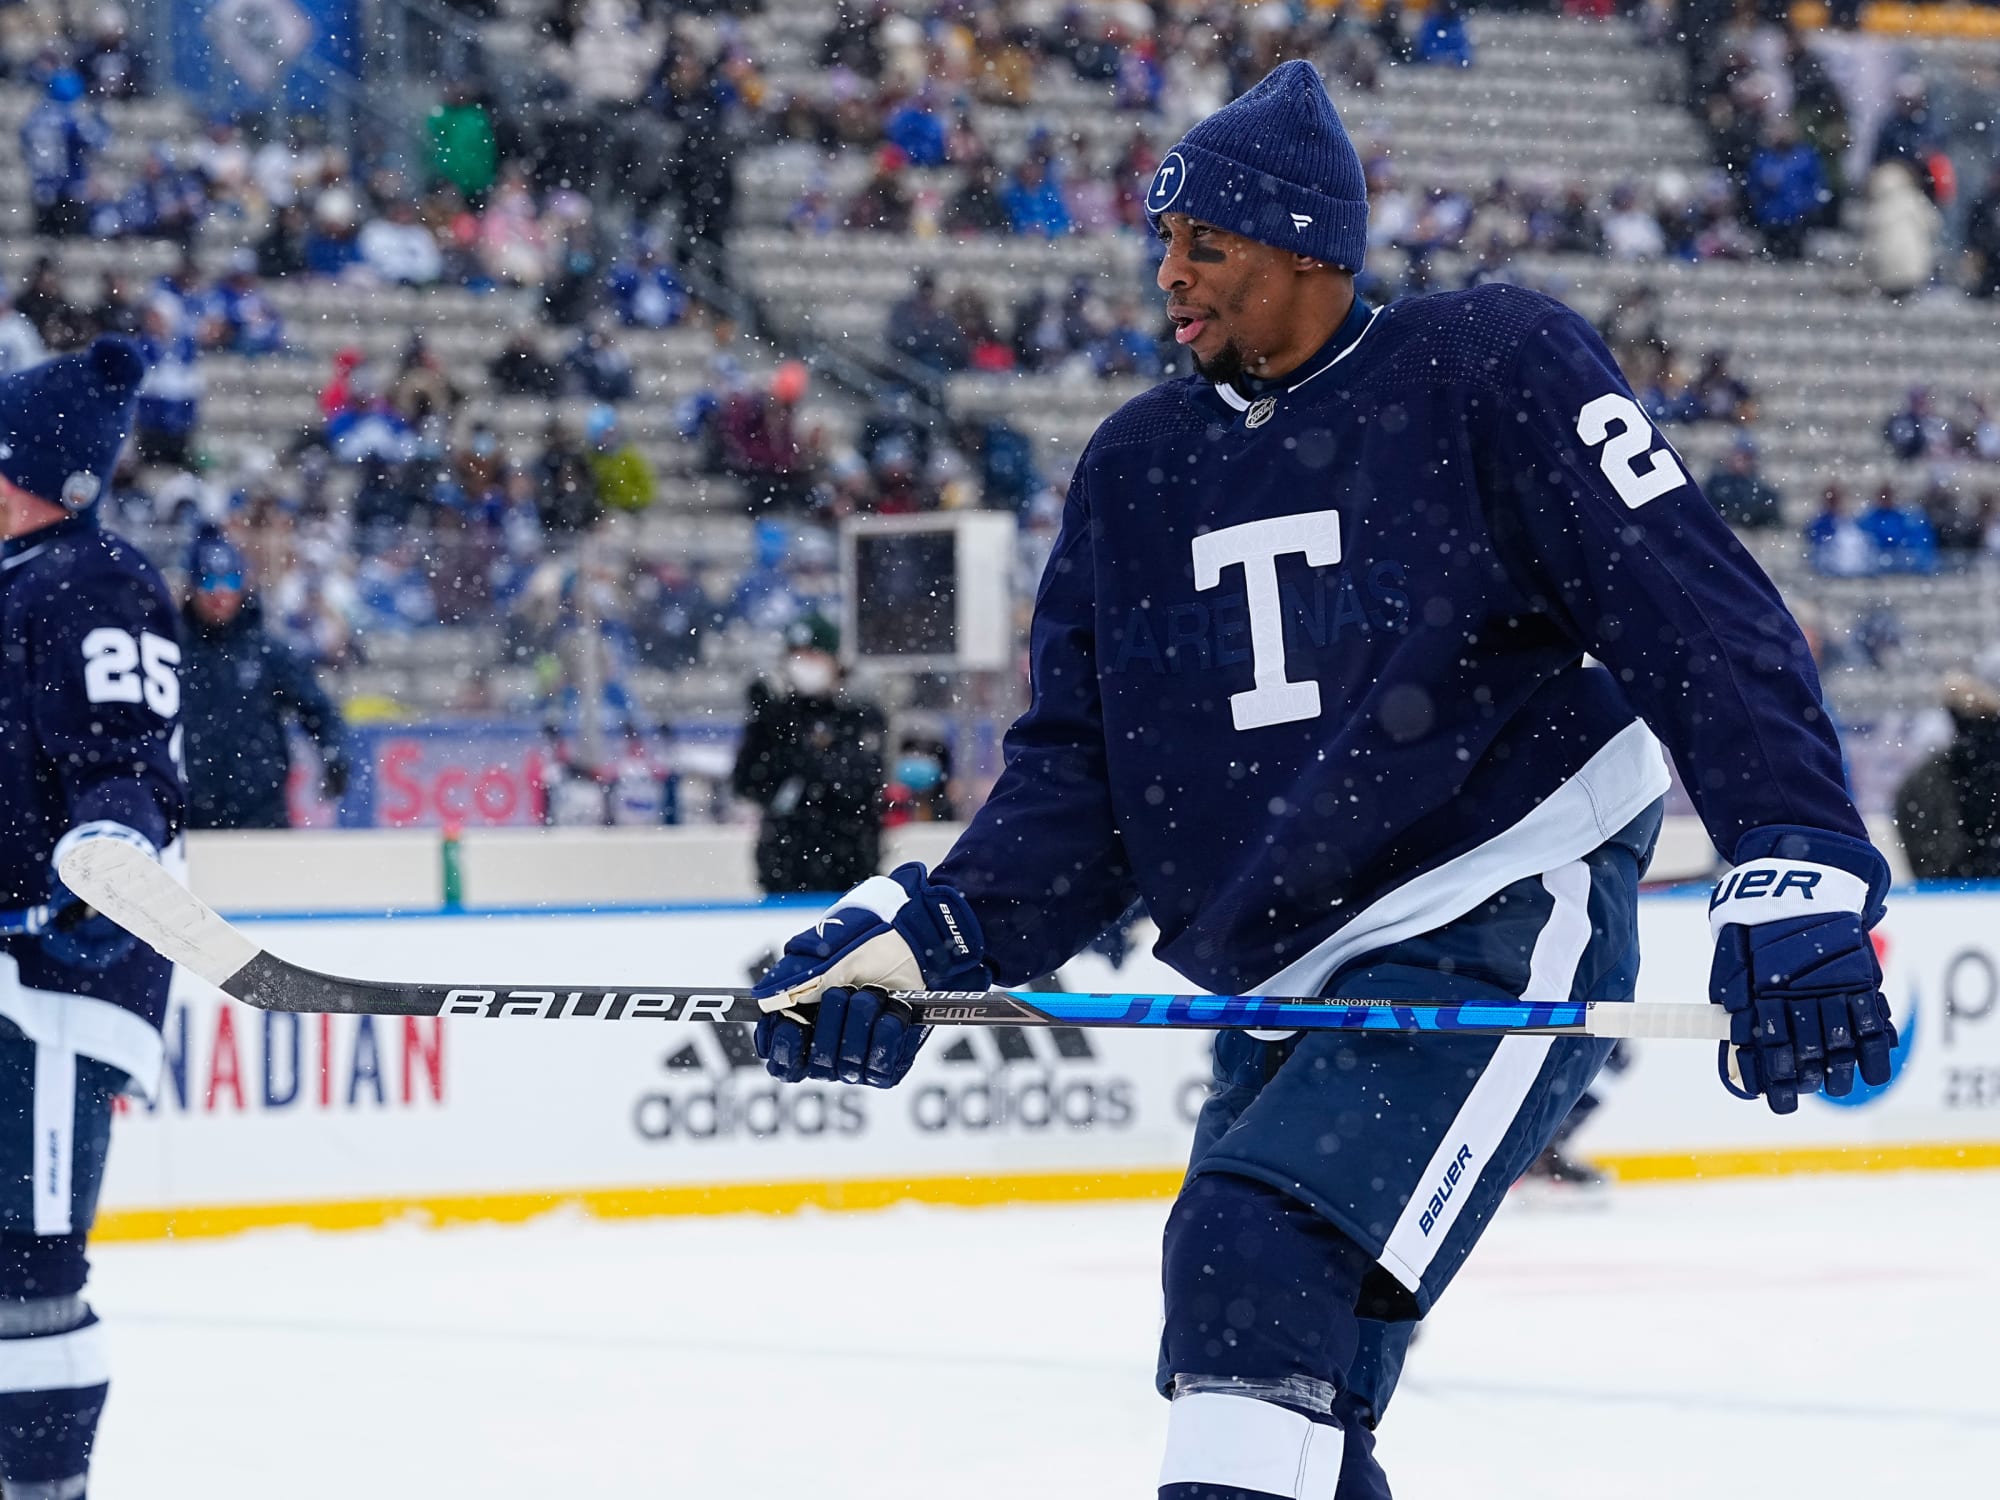 What Should the Toronto Maple Leafs Do With Wayne Simmonds?